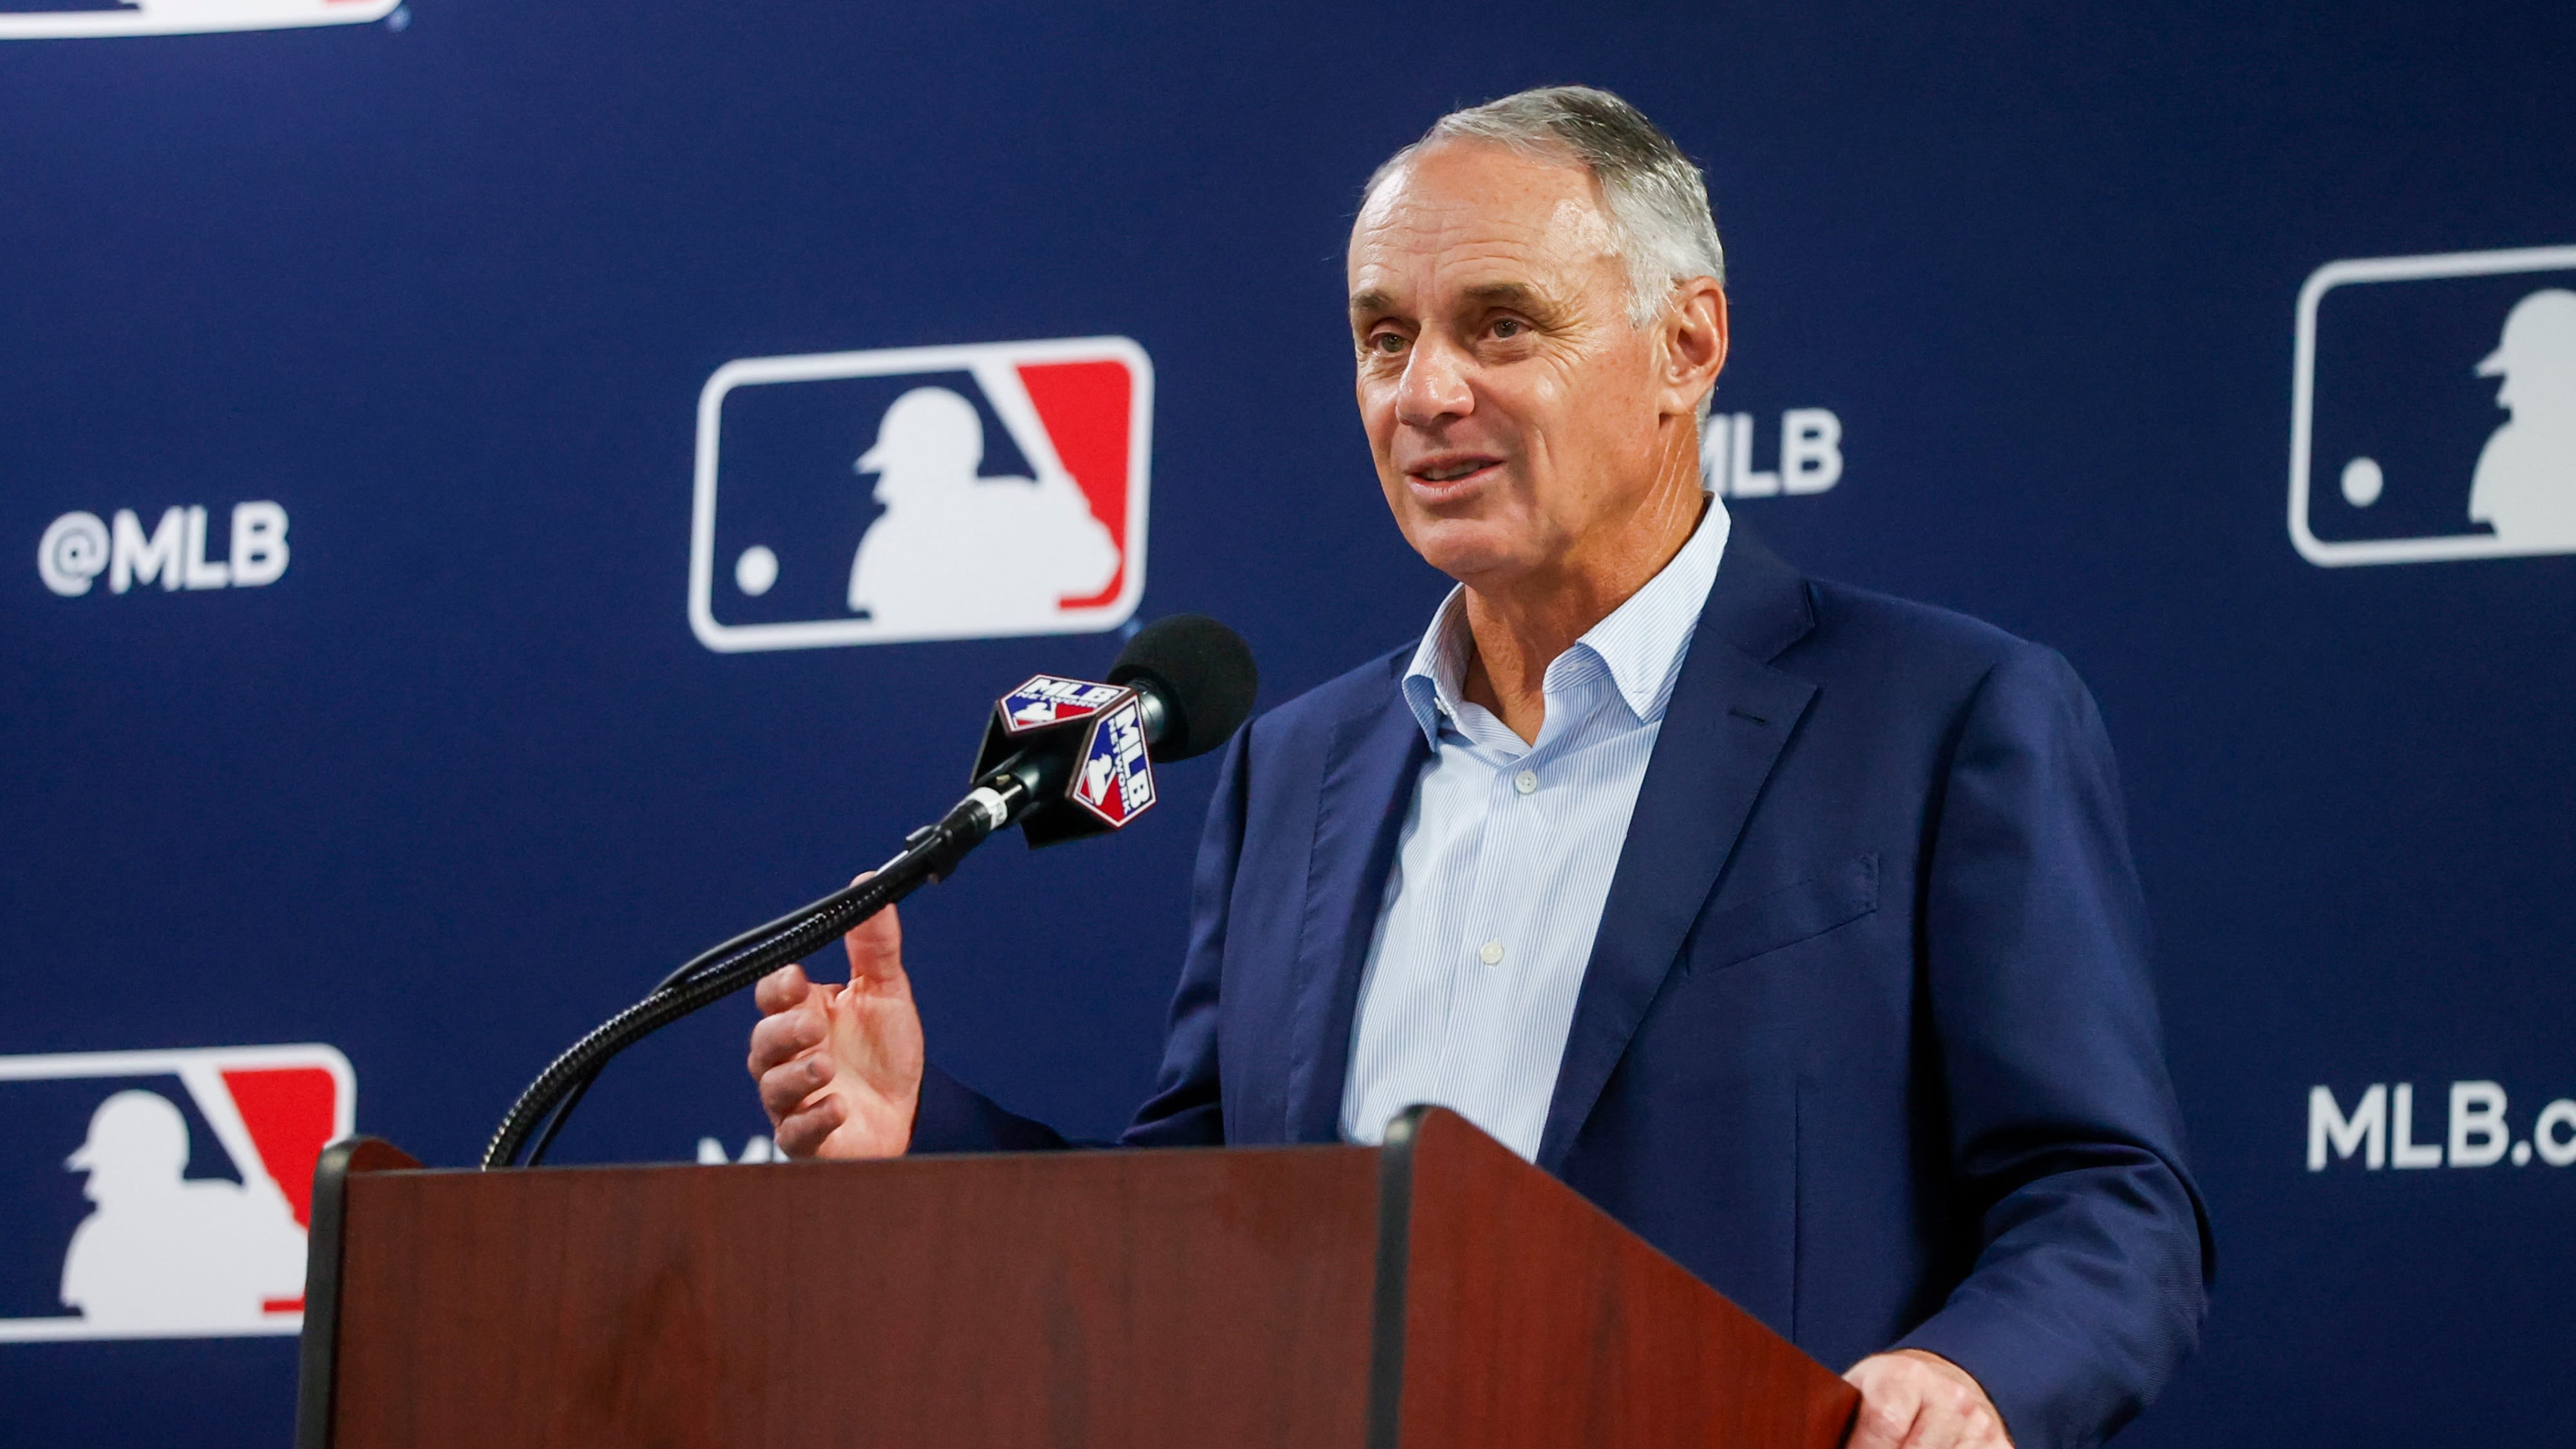 MLB’s Rob Manfred confident of Rays’ stadium deal being approved